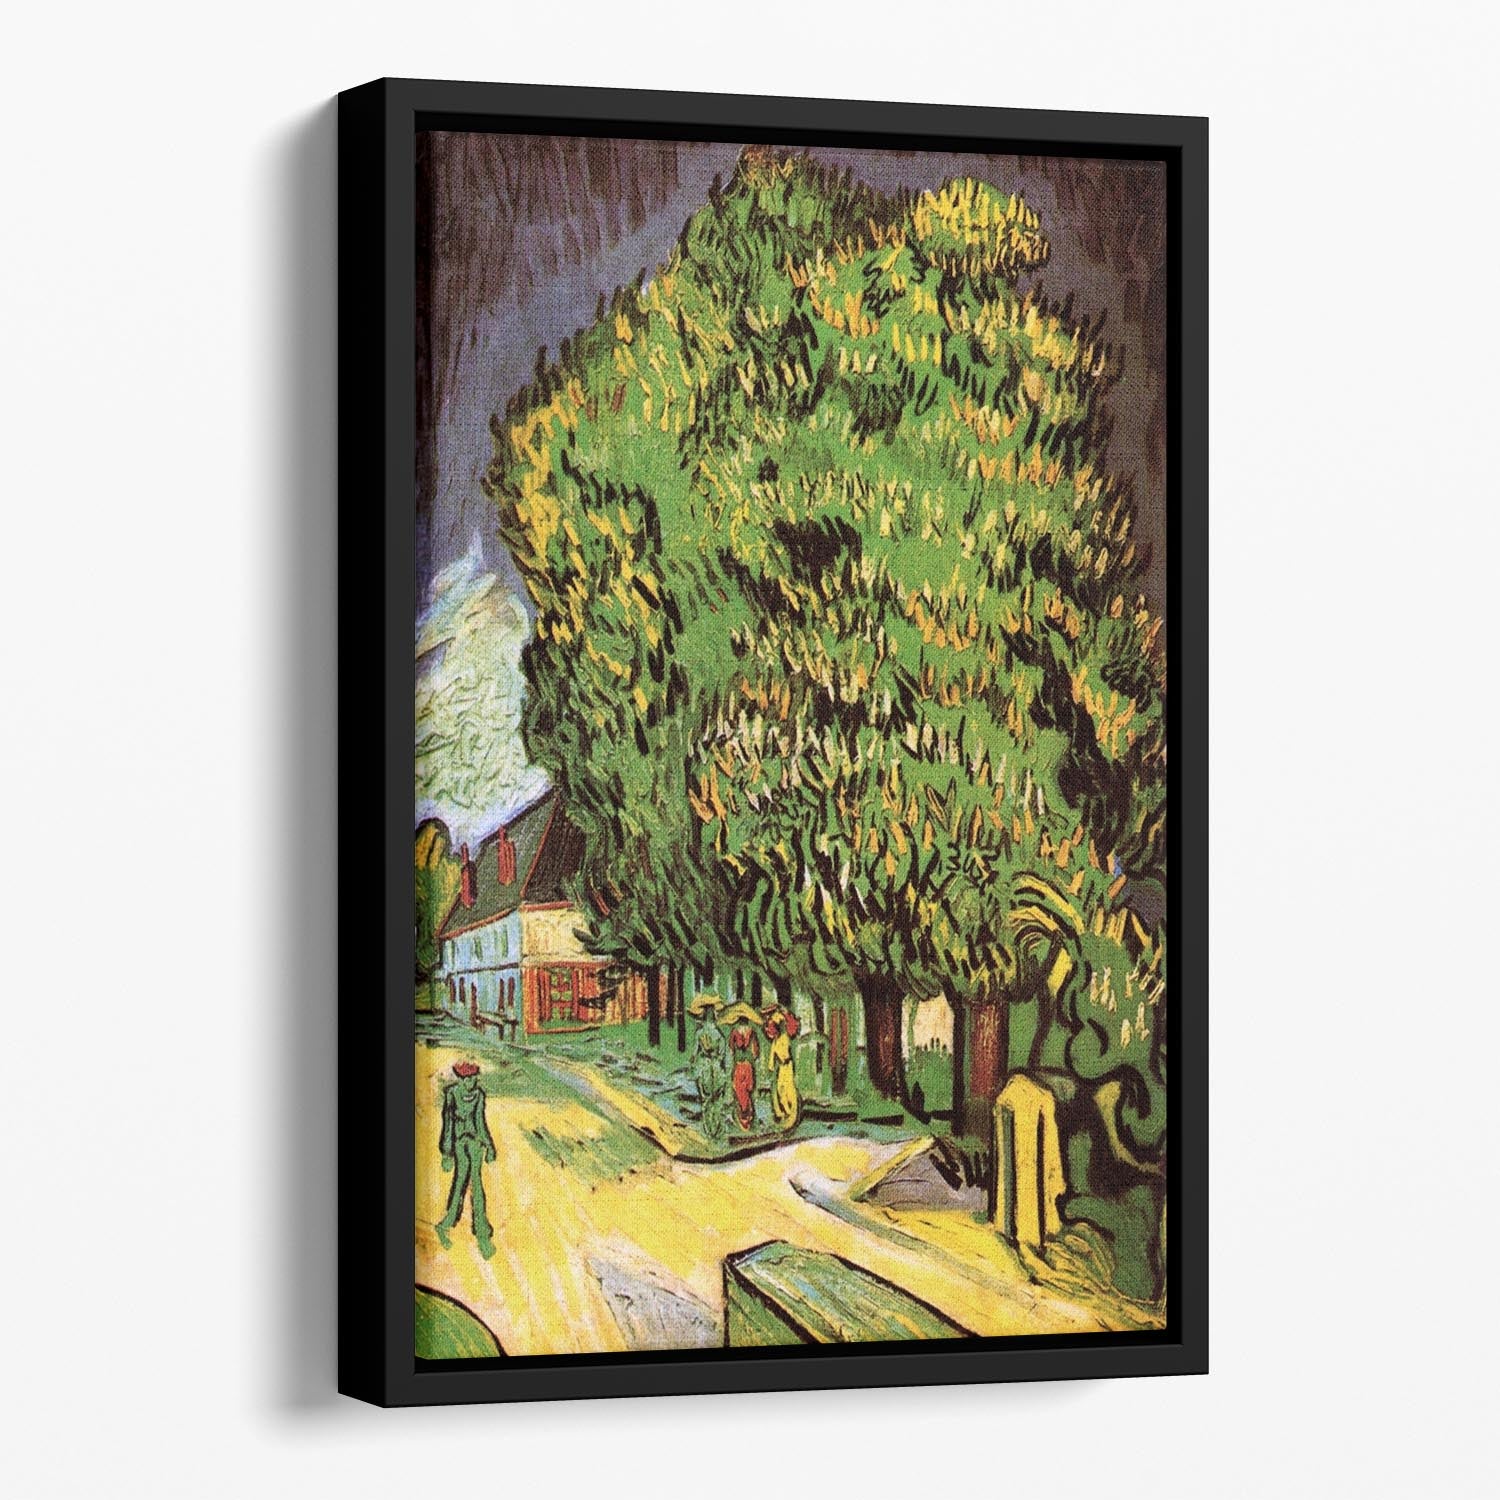 Chestnut Trees in Blossom by Van Gogh Floating Framed Canvas